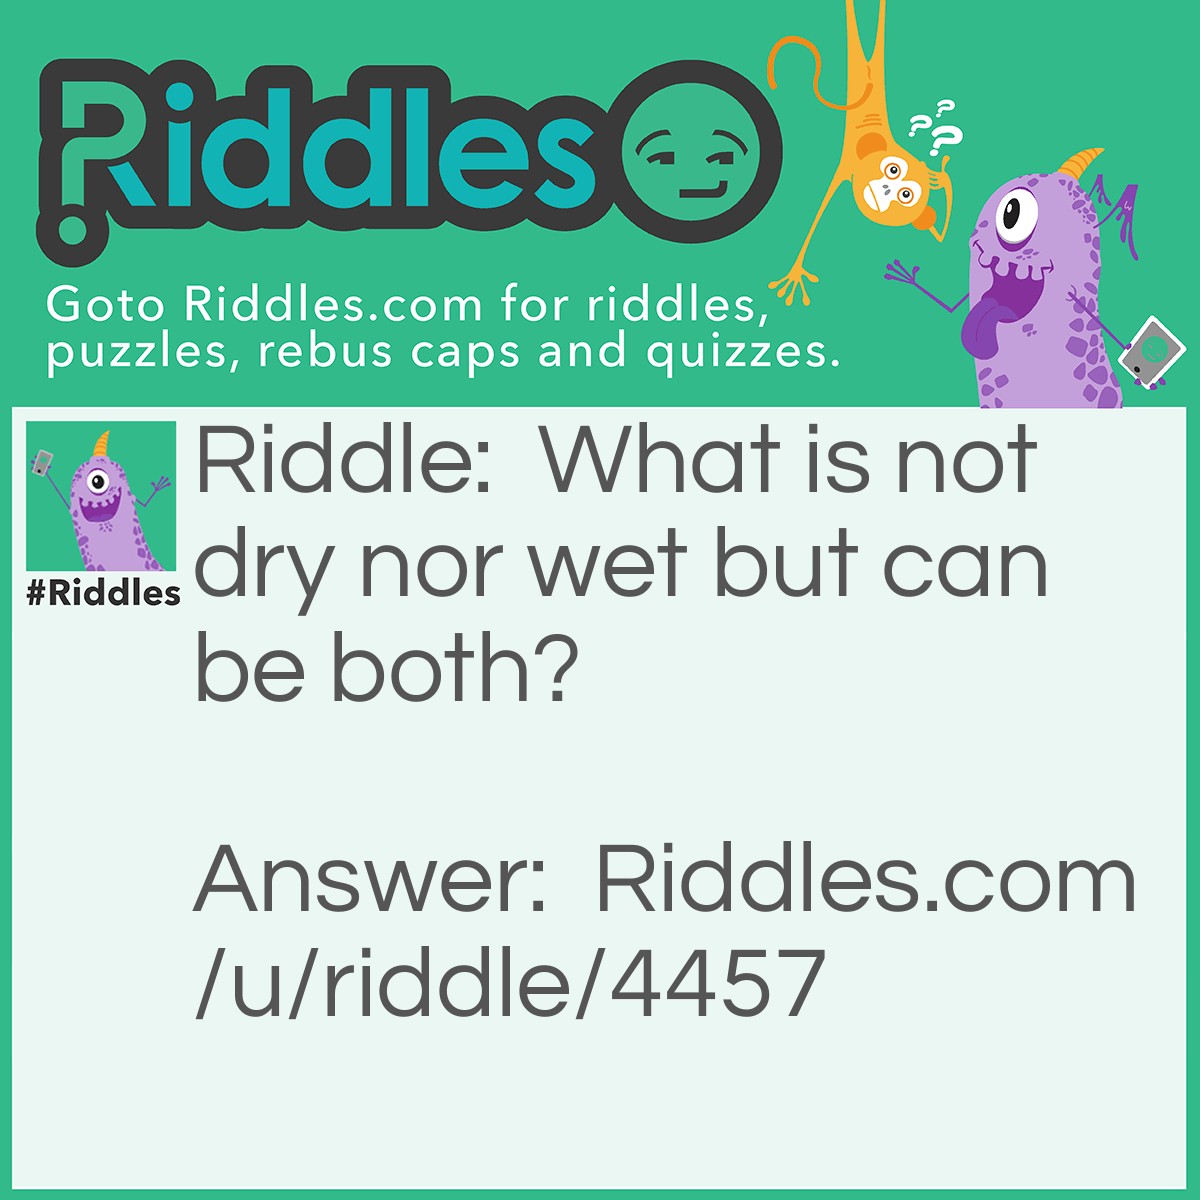 Riddle: What is not dry nor wet but can be both? Answer: Ice.